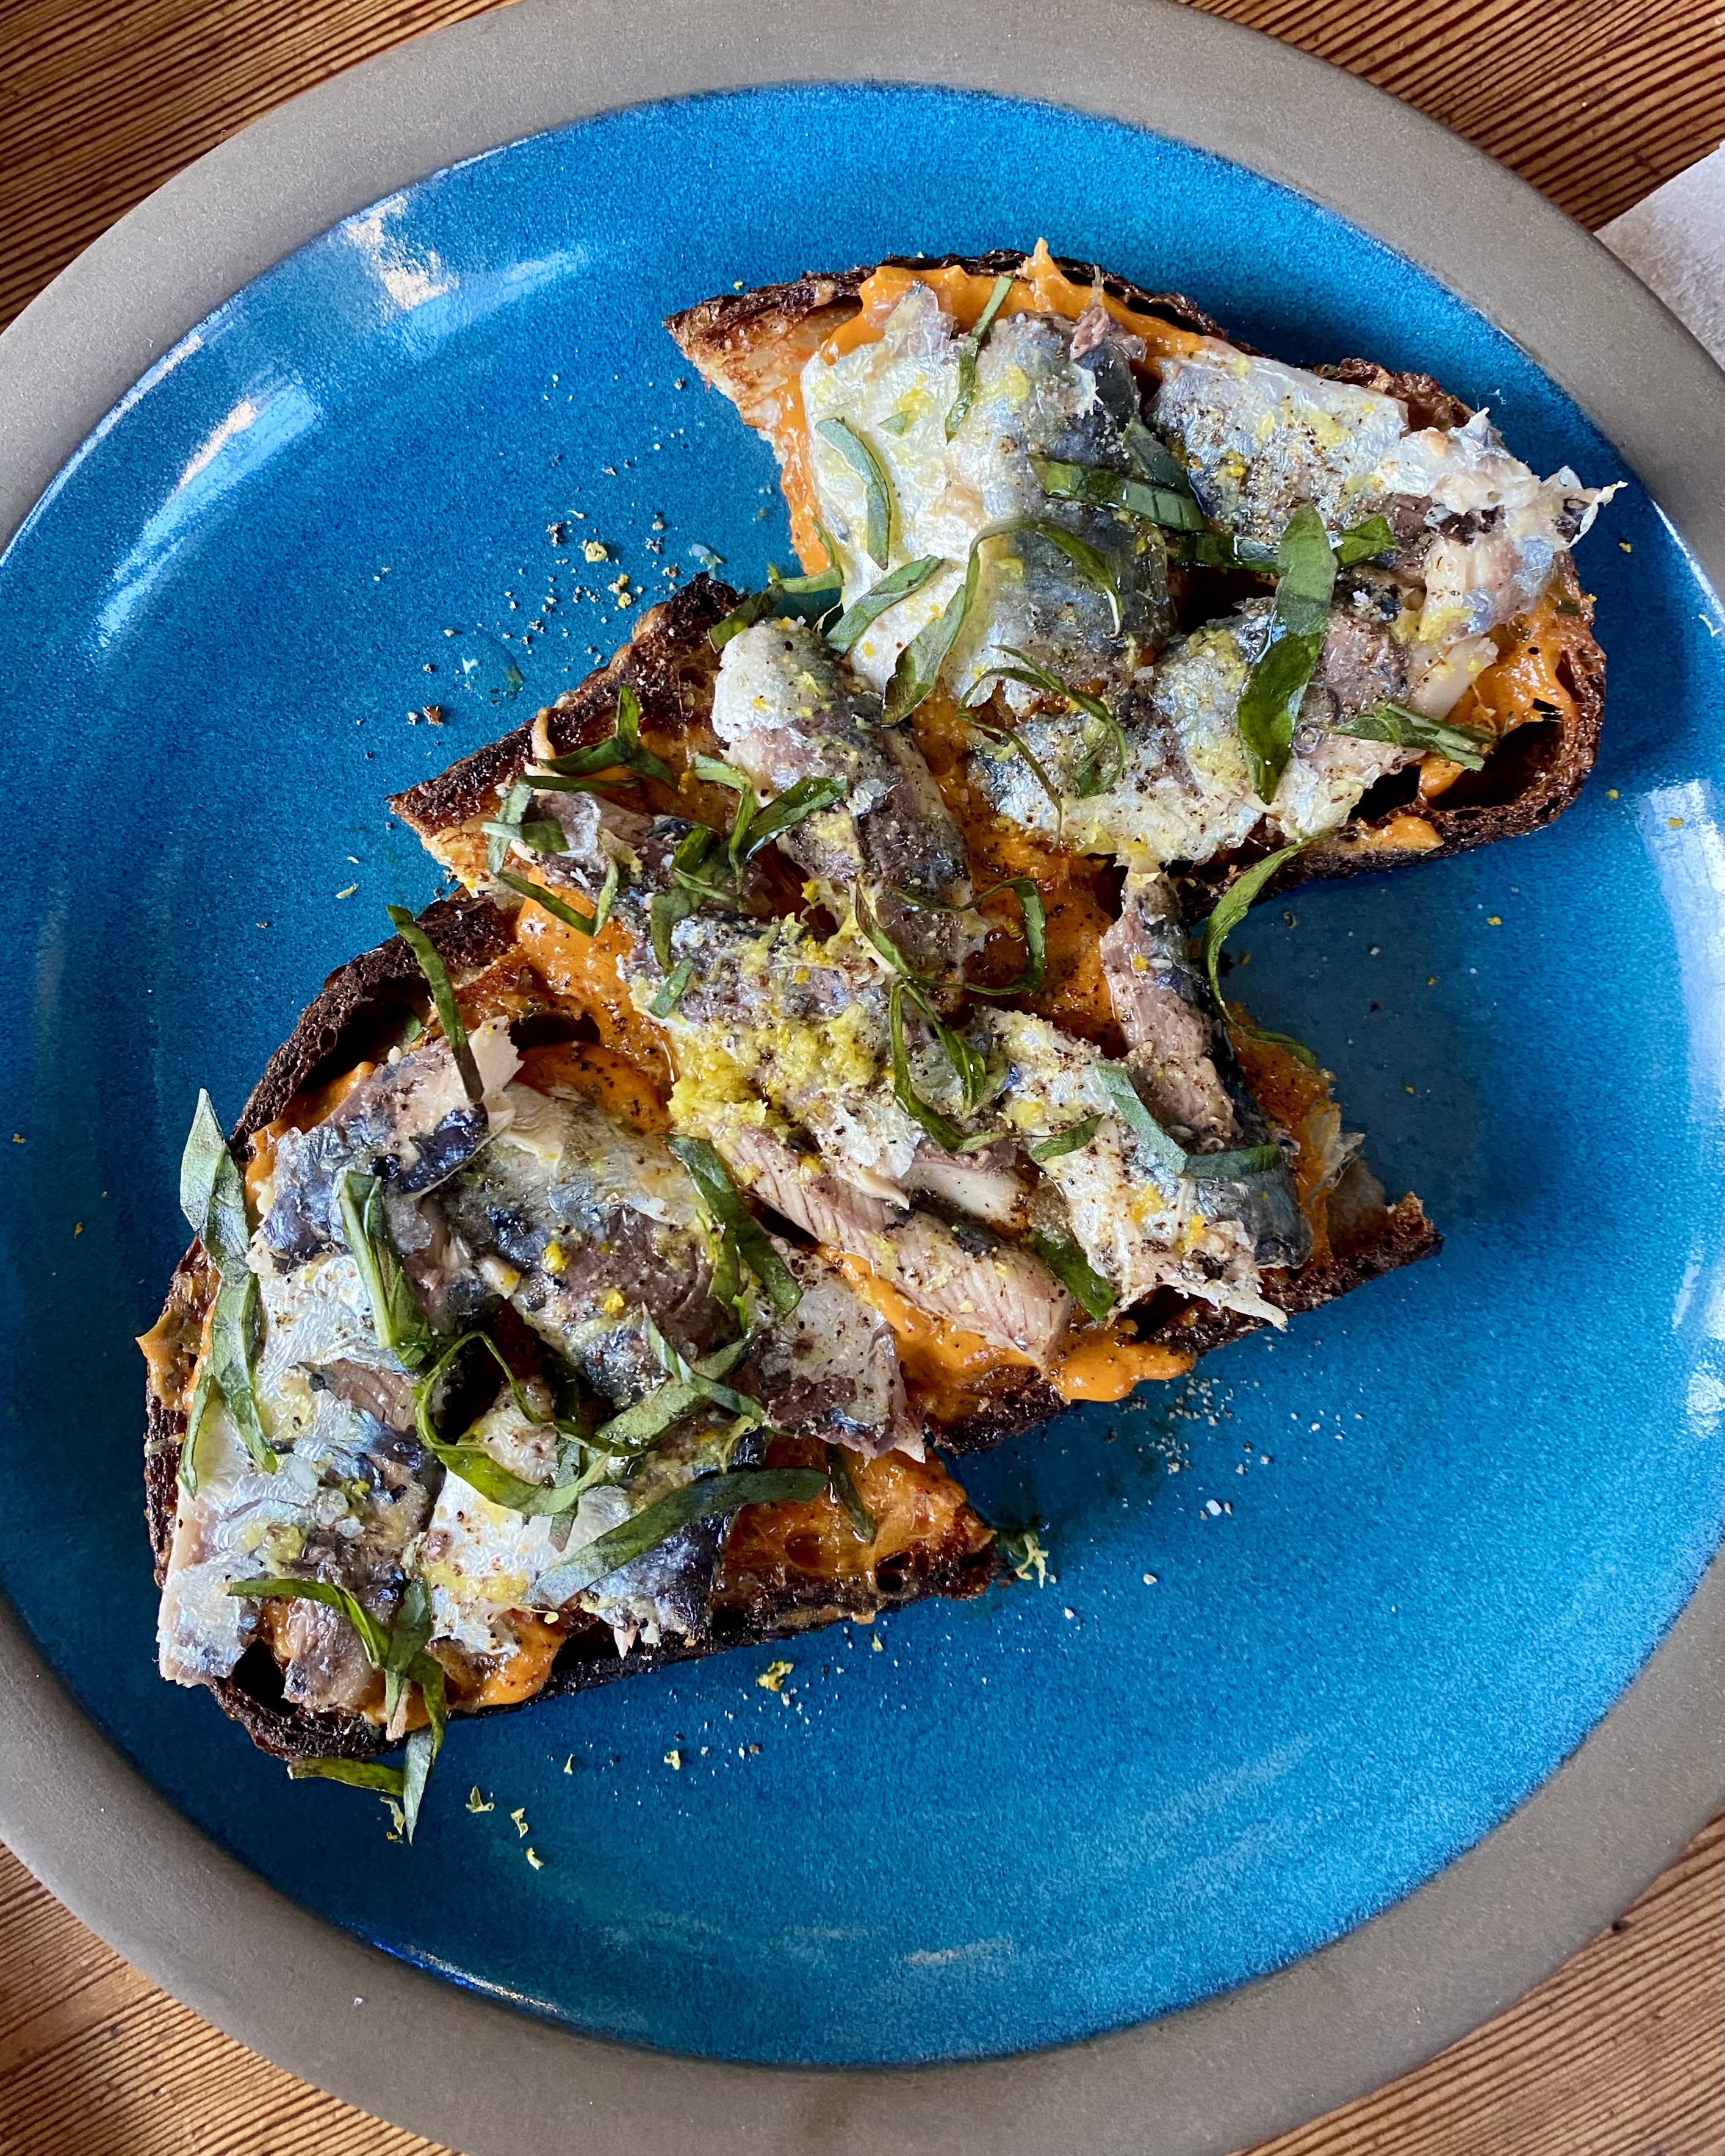 An open-faced sandwich topped with anchovies and fresh herbs on a plate ceramic plate.